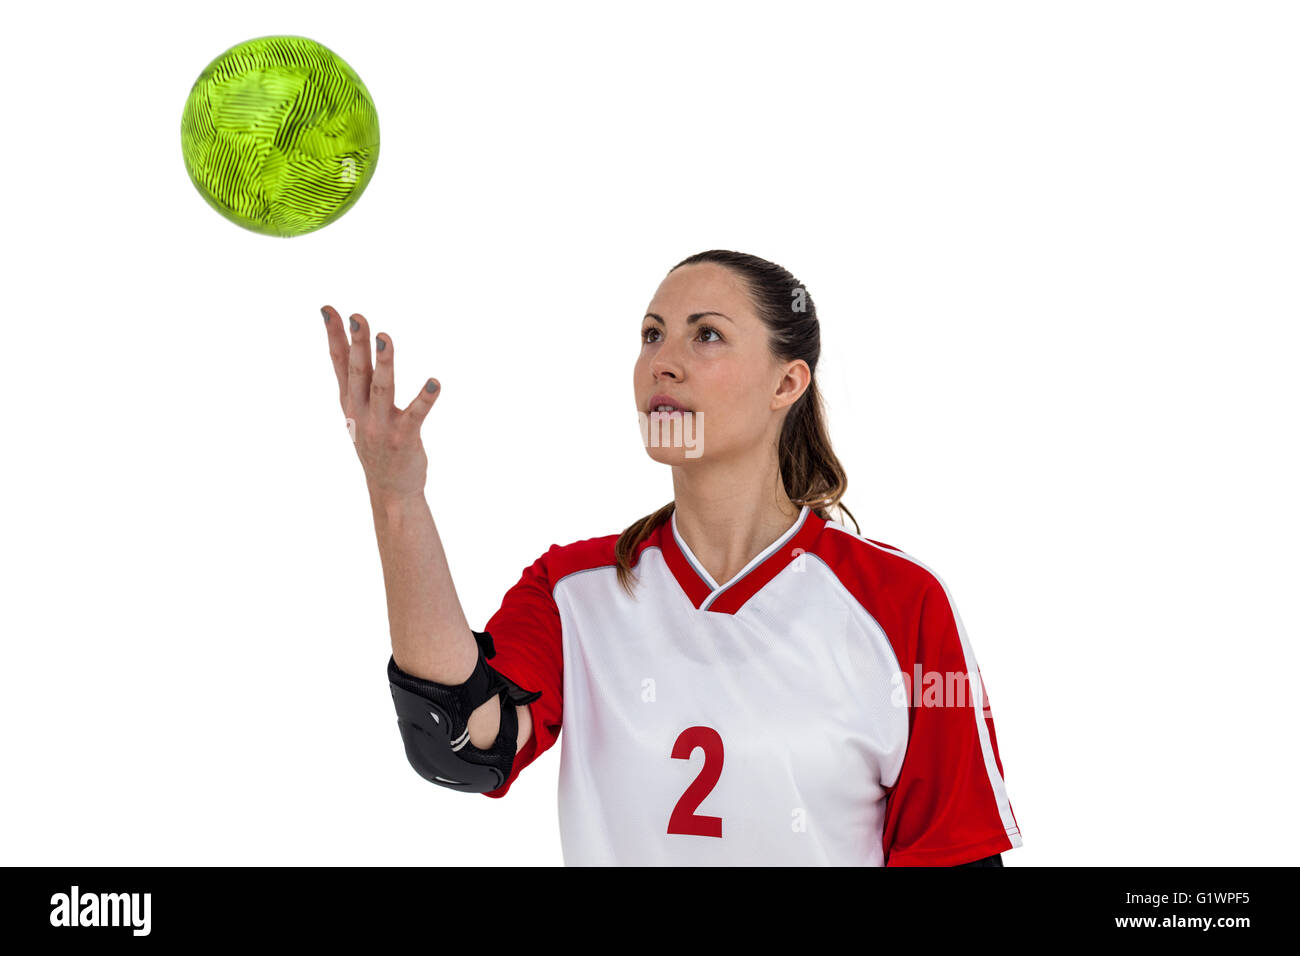 Sportswoman Playing with ball Banque D'Images